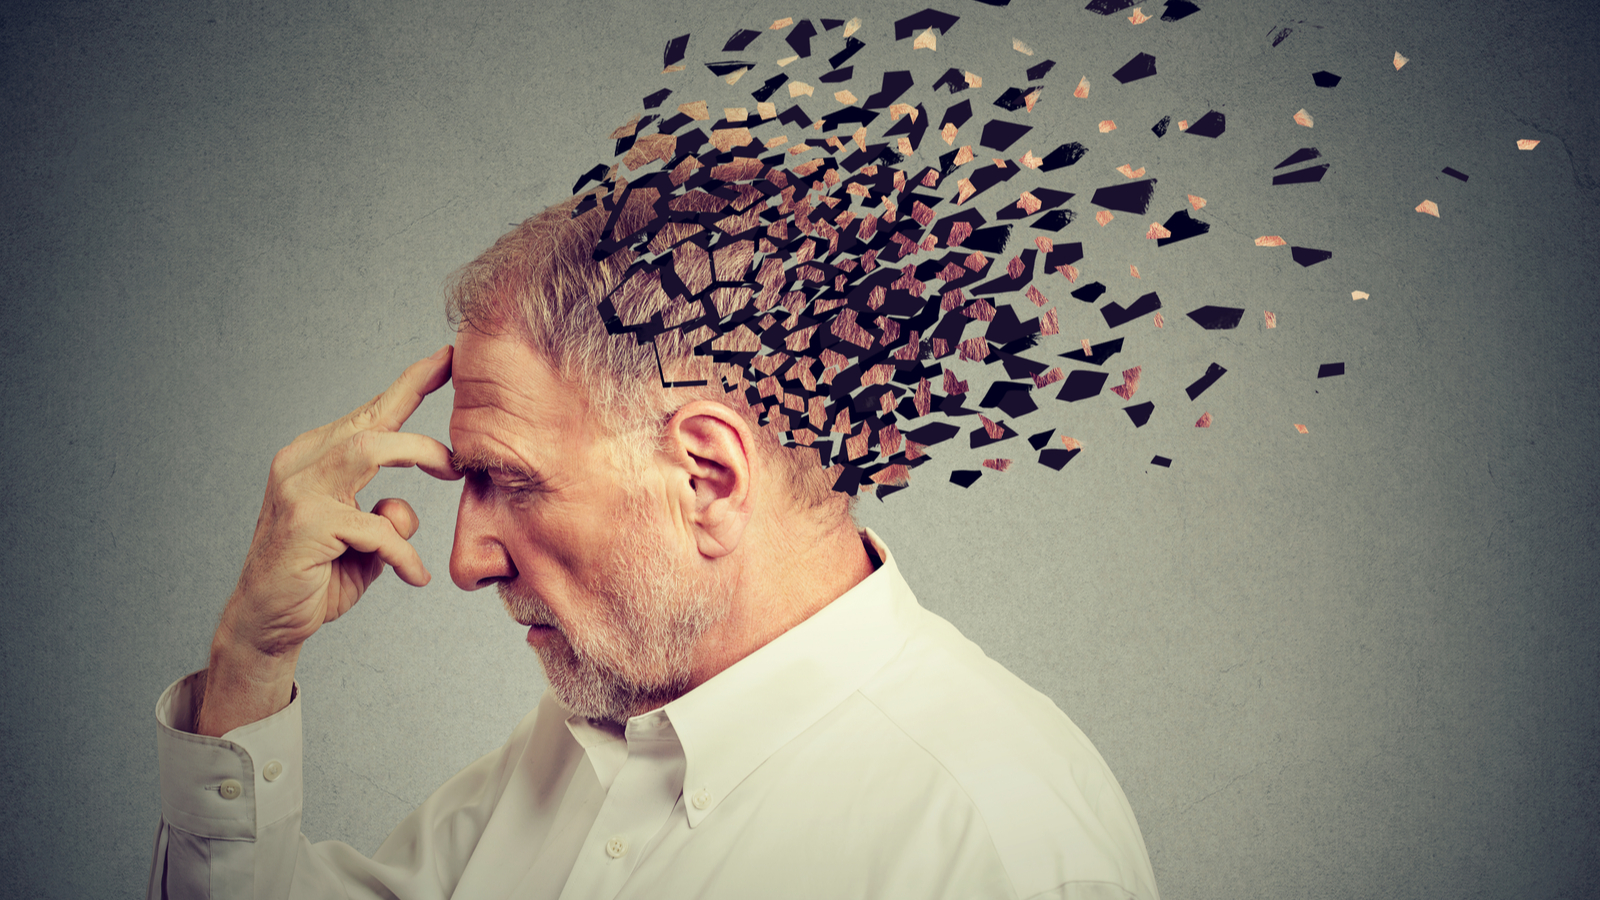 alzheimers stock image representing AXSM stock